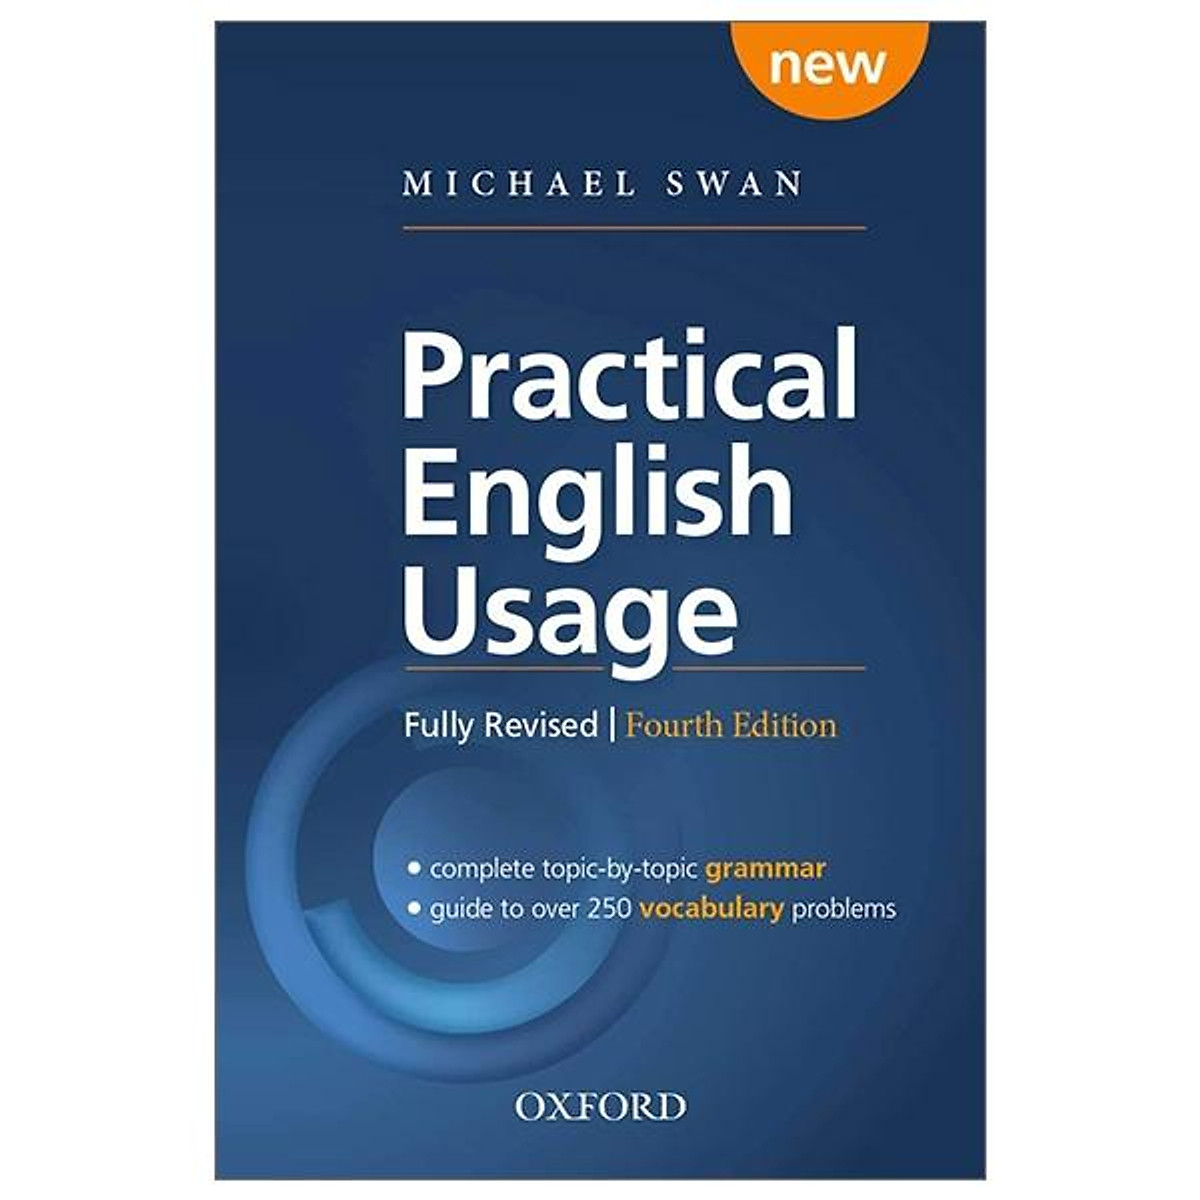 Practical English Usage, 4th edition: Paperback: Michael Swan's Guide To Problems In English